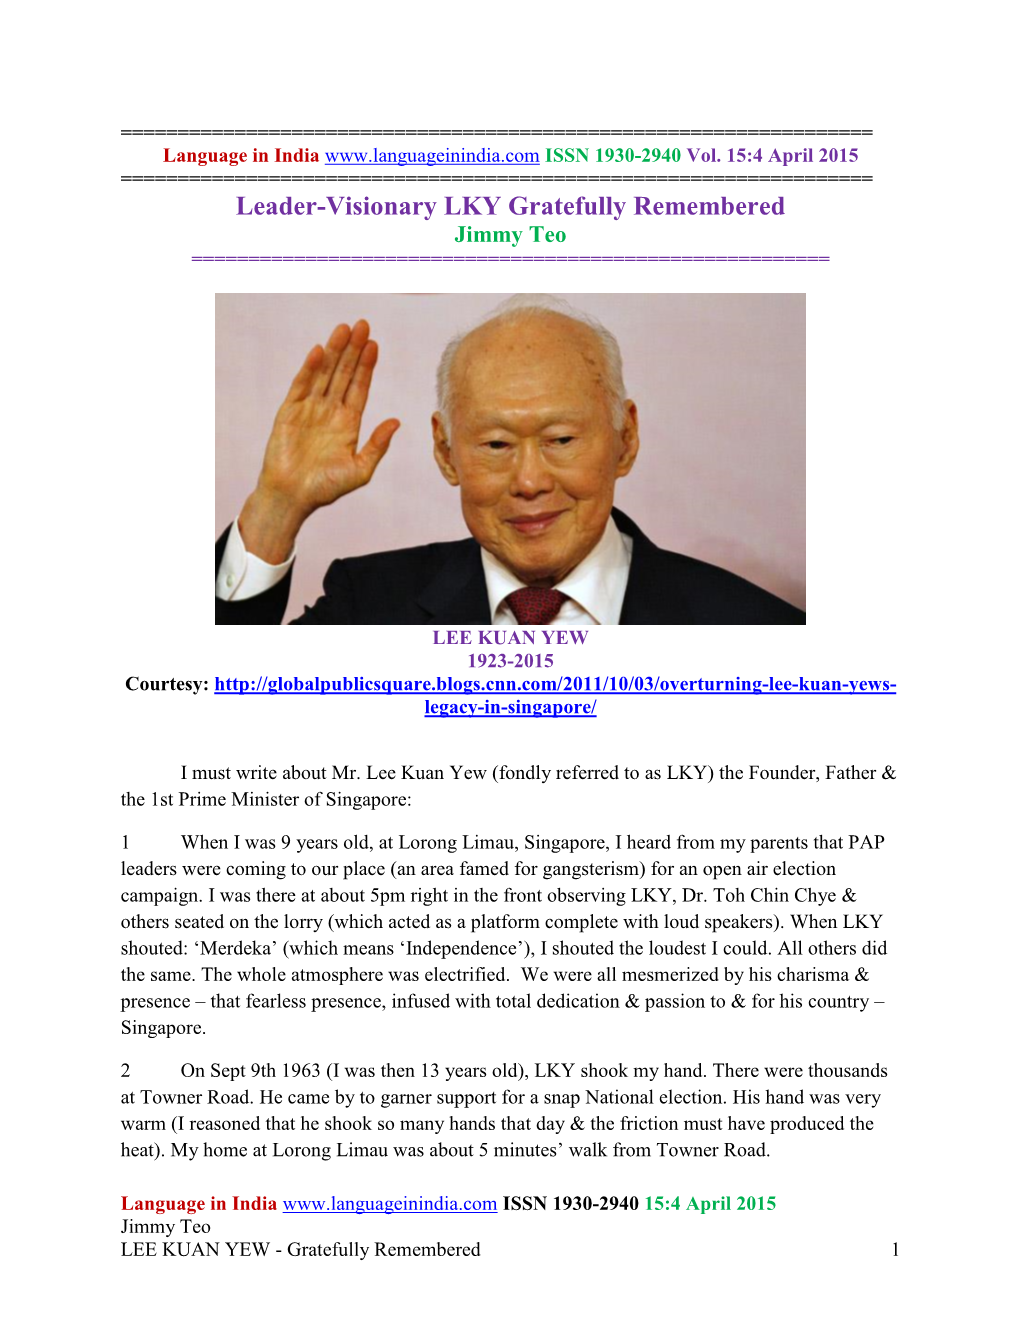 Leader-Visionary LKY Gratefully Remembered Jimmy Teo ======